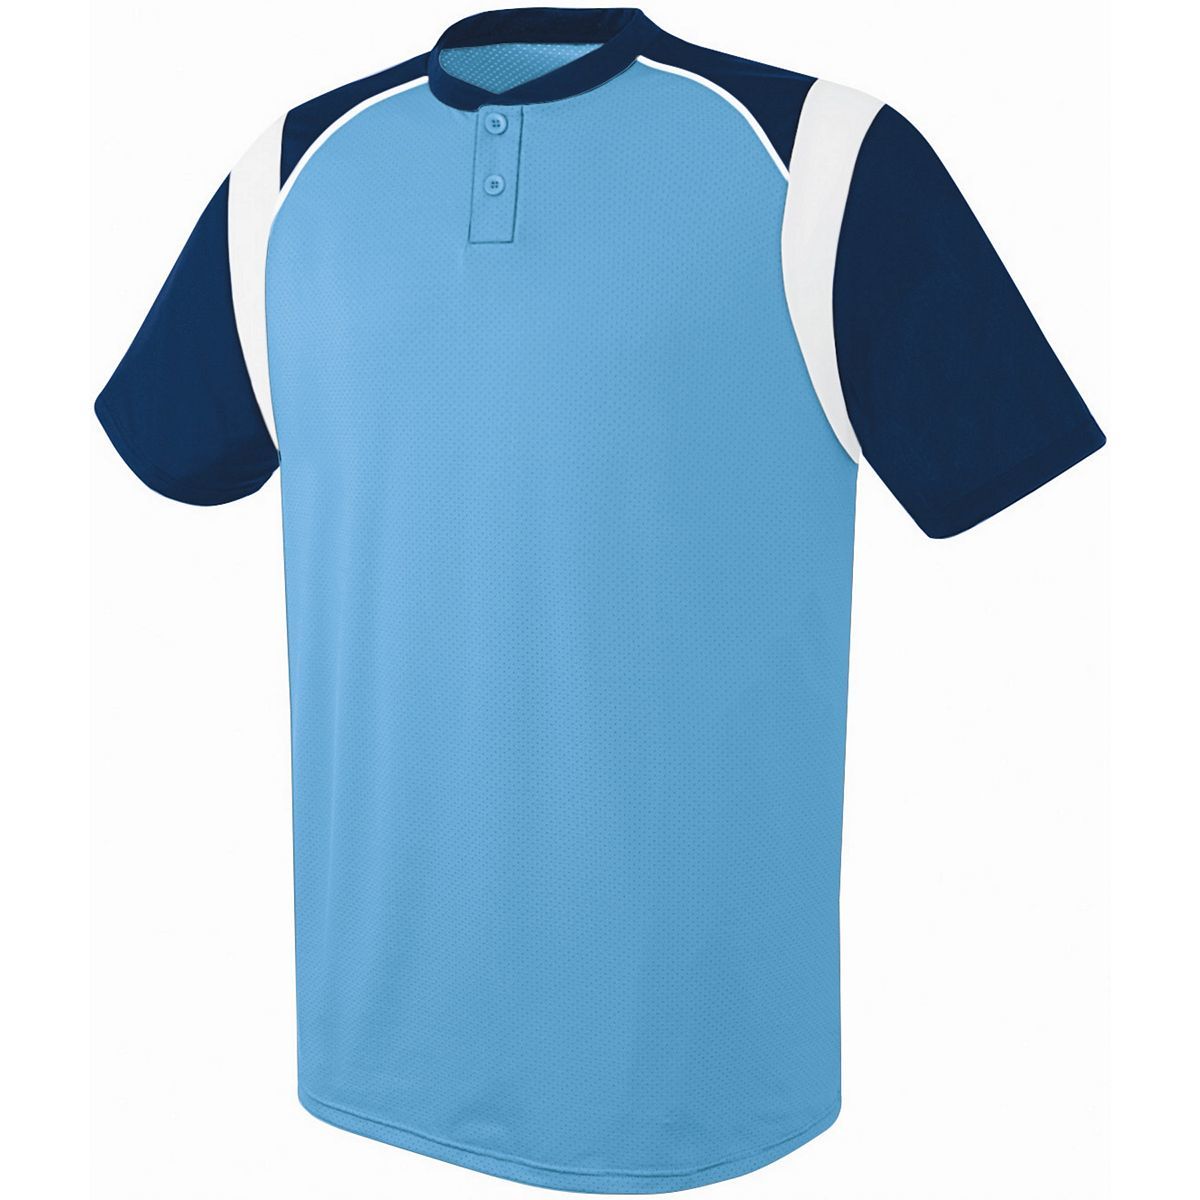 Augusta Sportswear Wildcard Two-Button Jersey in Columbia Blue/Navy/White  -Part of the Adult, Adult-Jersey, Augusta-Products, Baseball, Shirts, All-Sports, All-Sports-1 product lines at KanaleyCreations.com